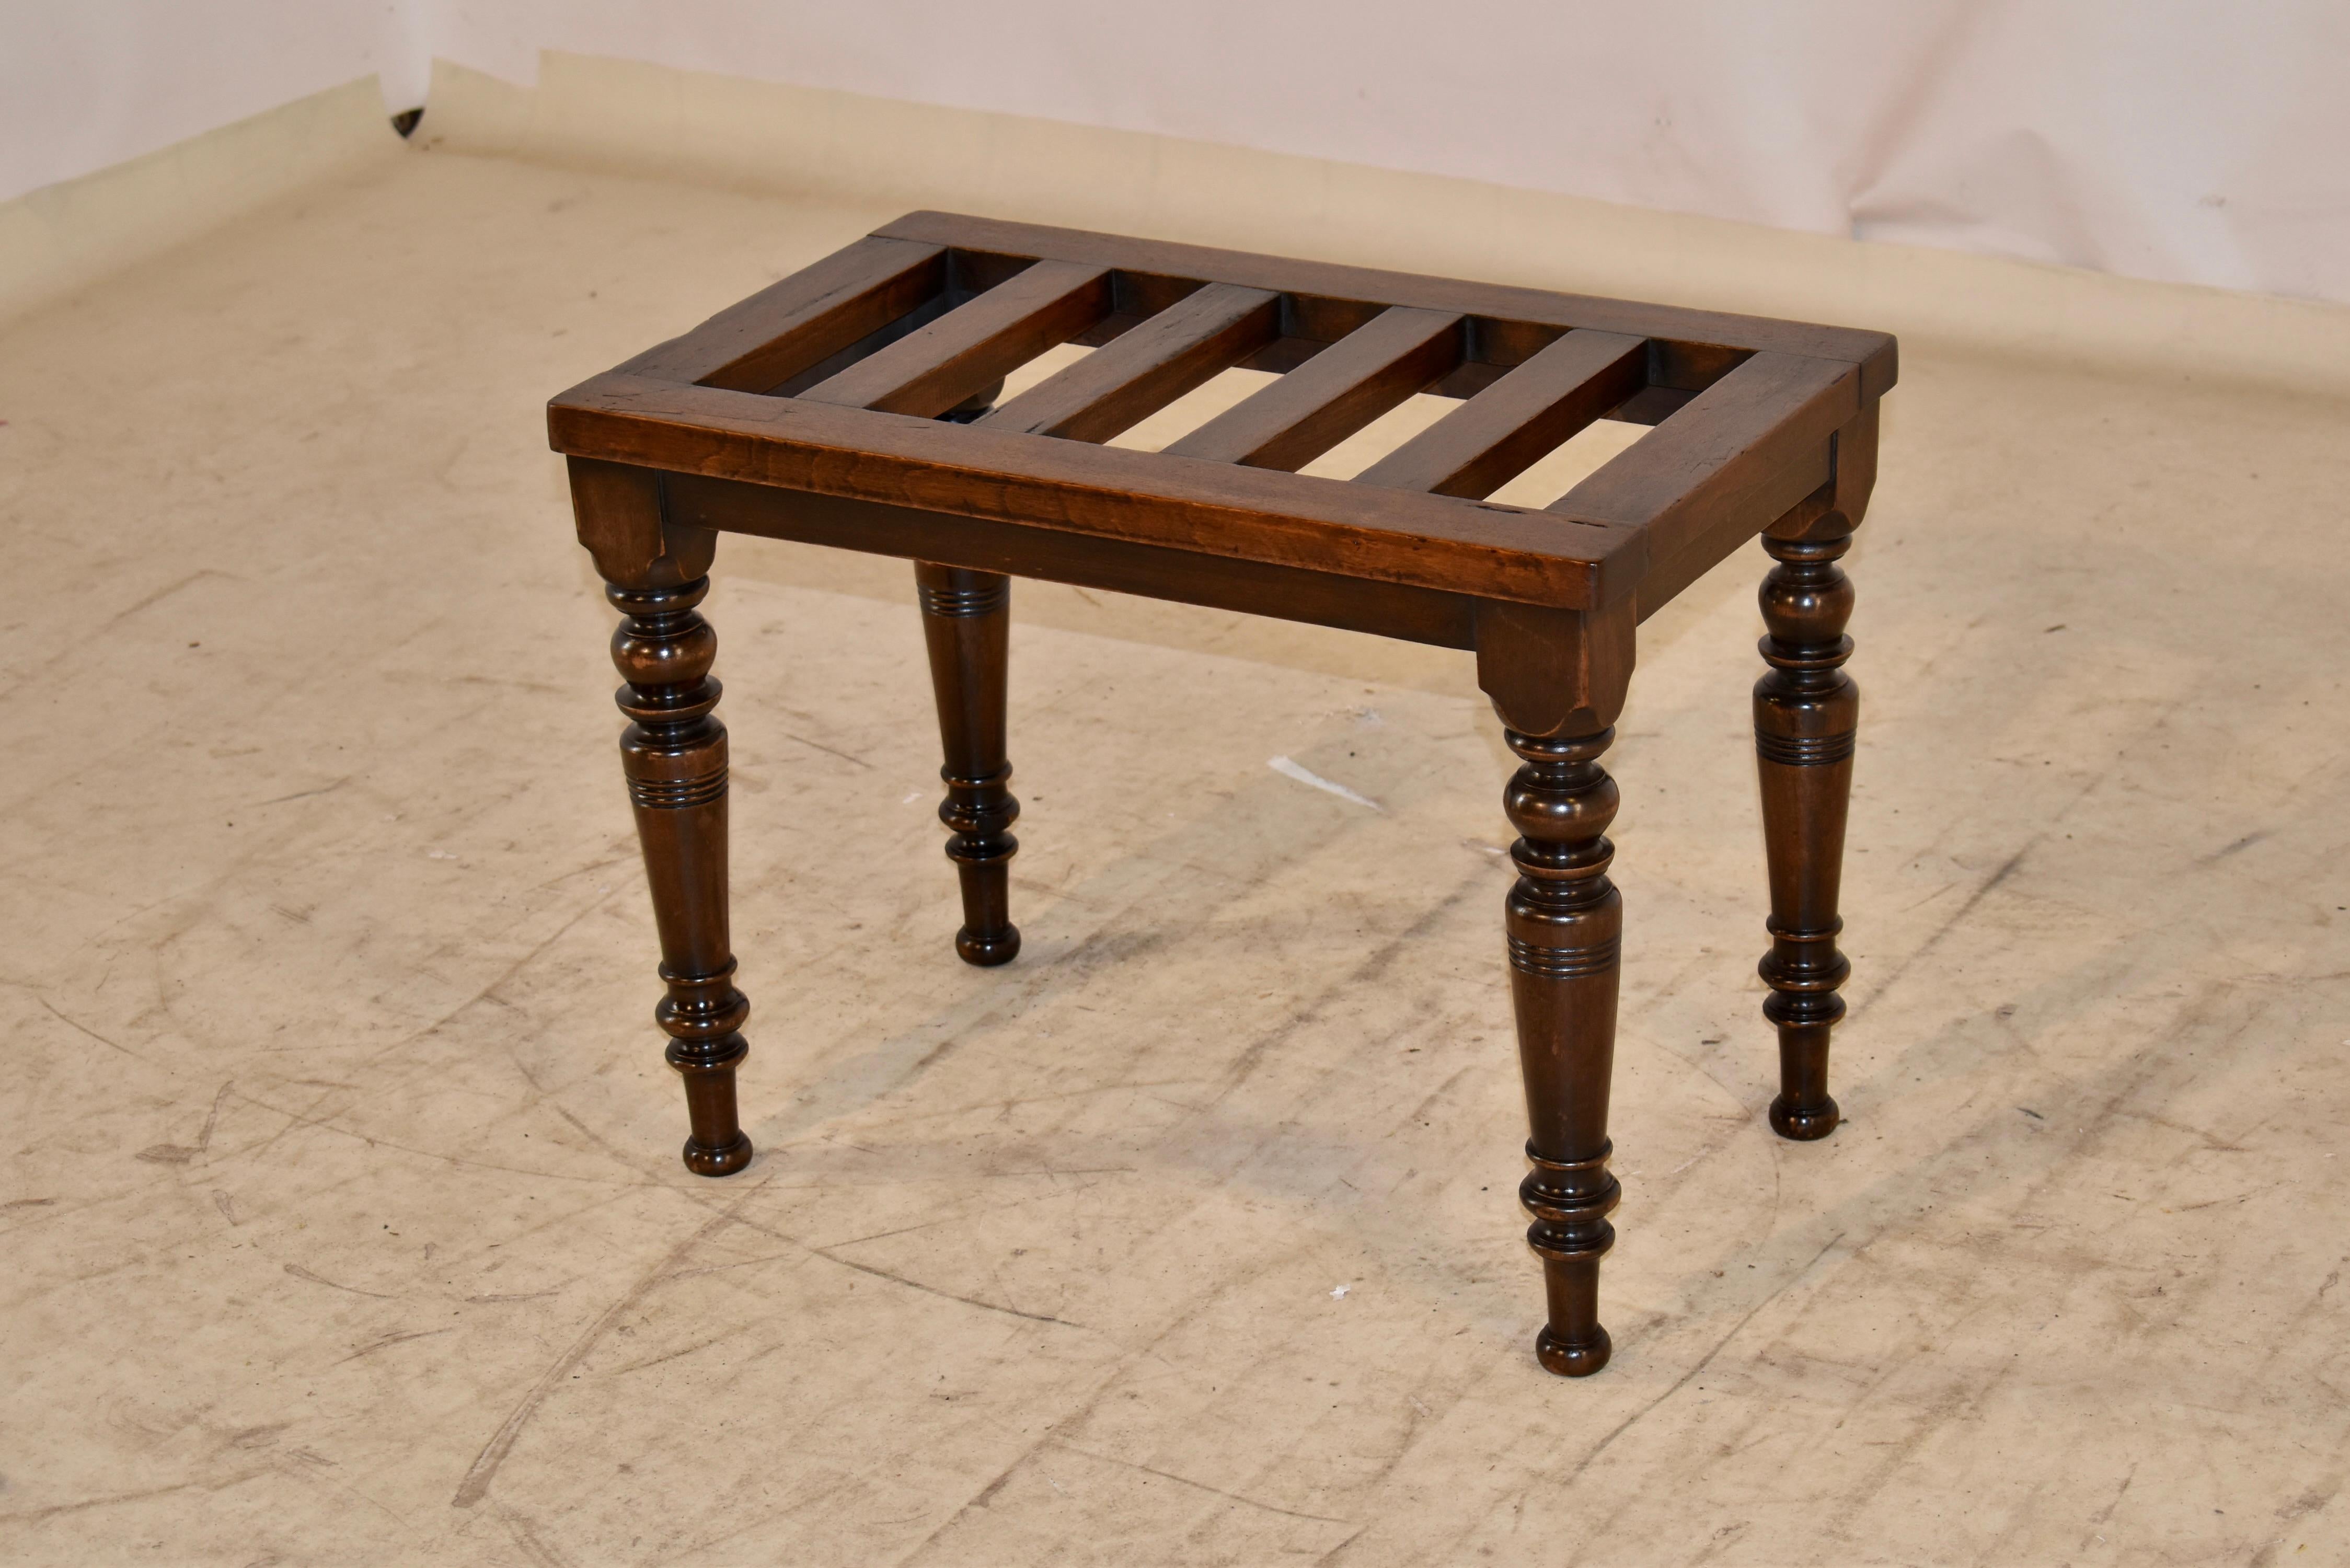 Turned 19th Century Mahogany Luggage Stand For Sale